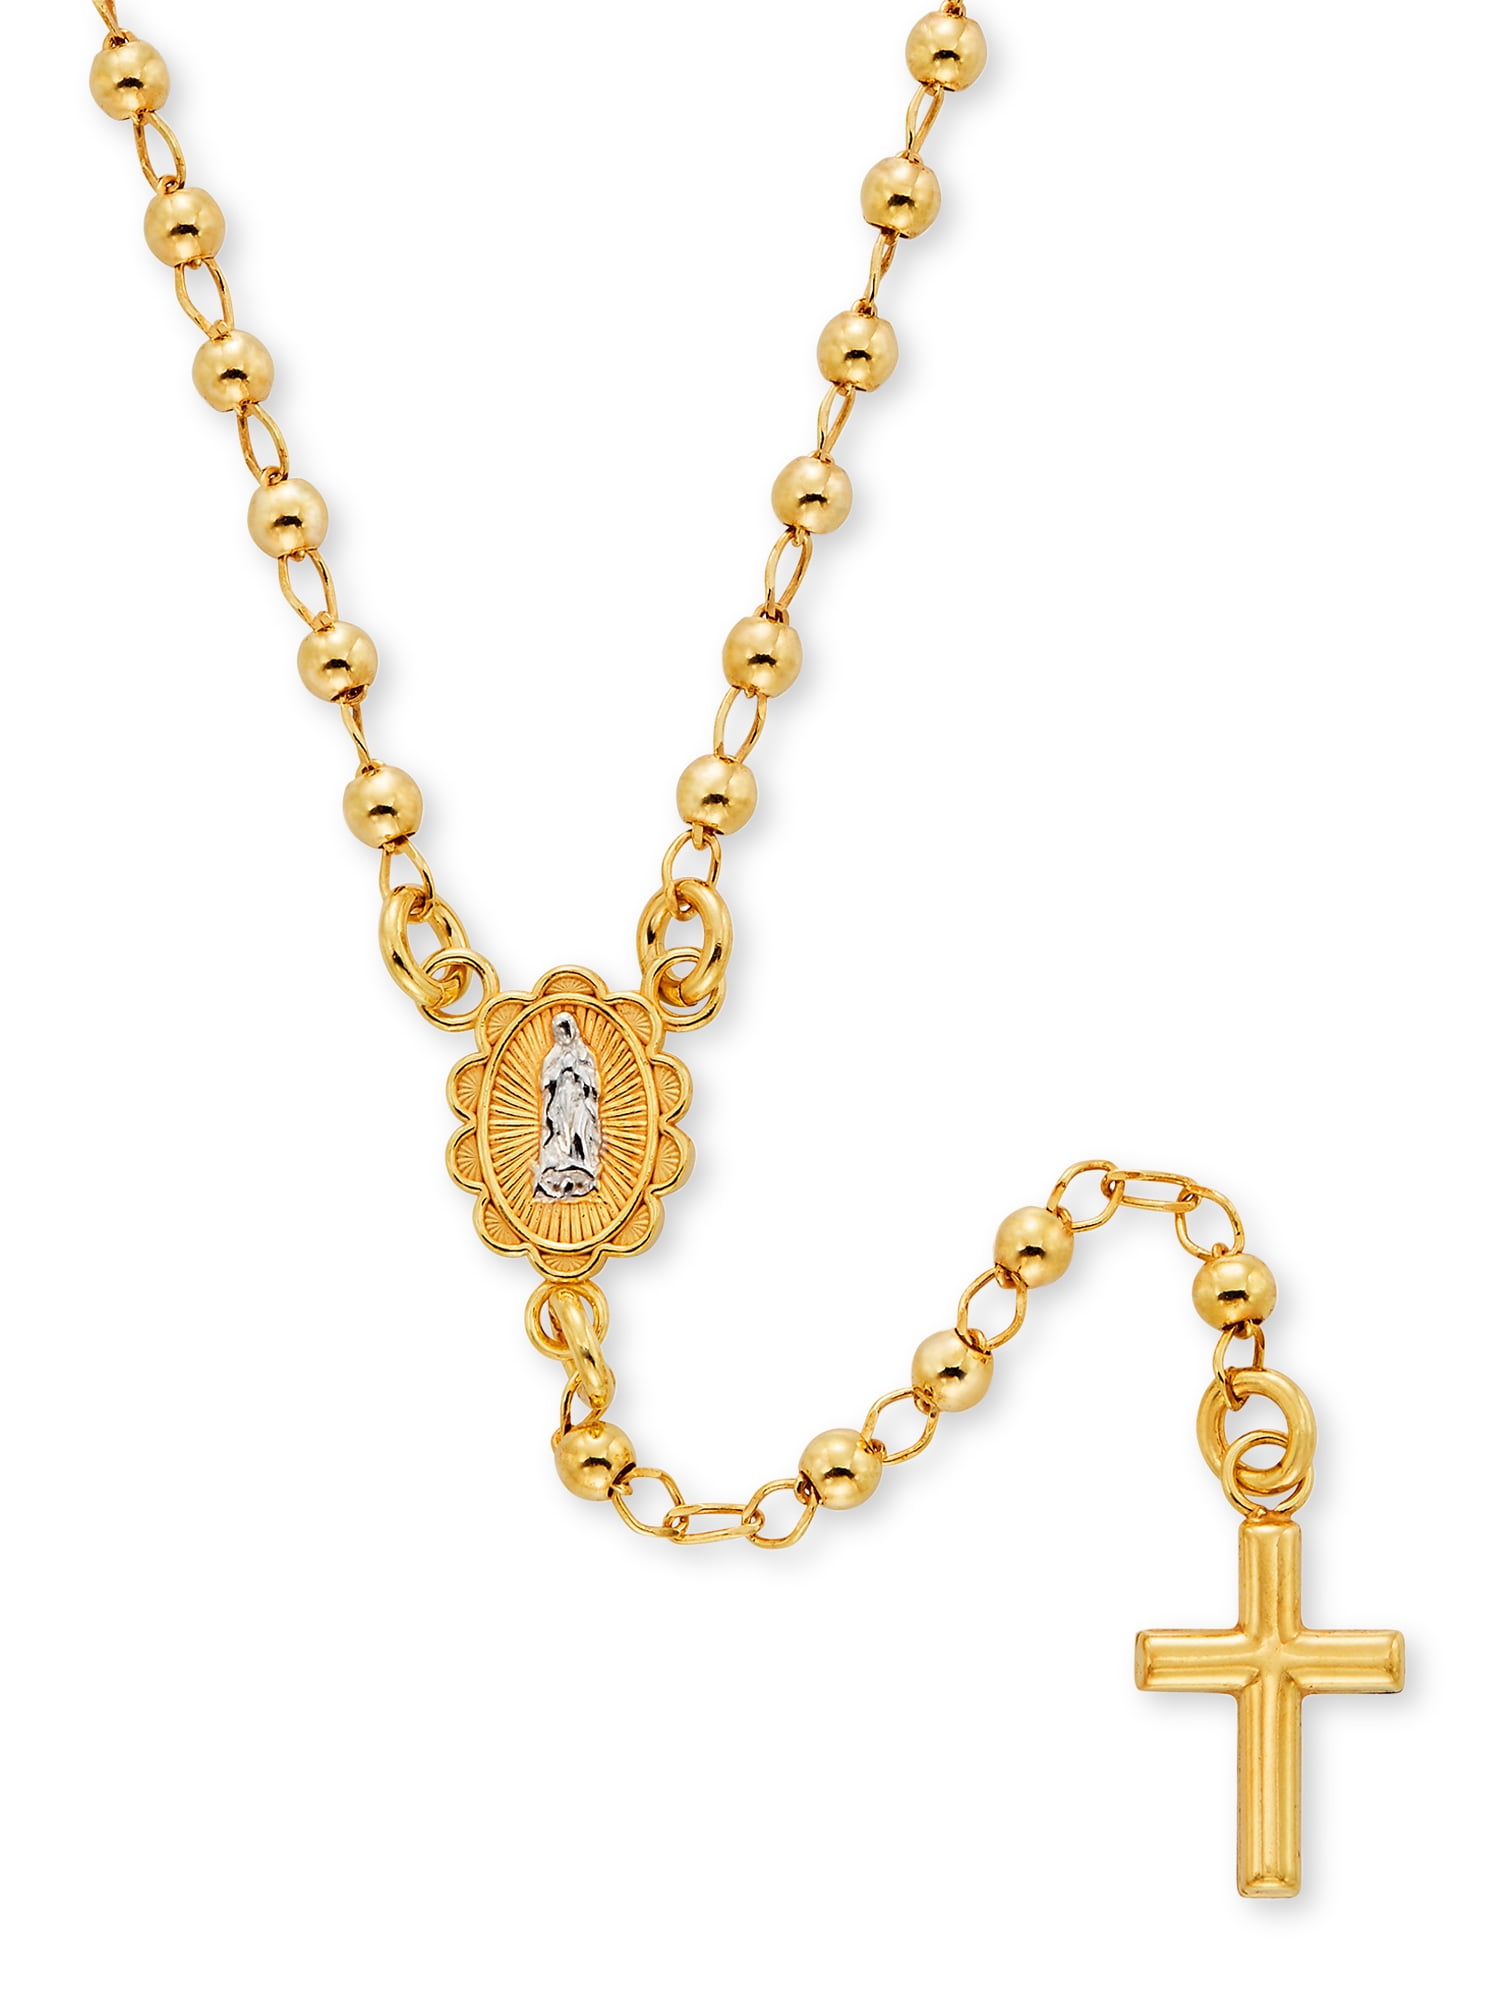 Real Solid 14K Tri Tone Gold Rosary Red Beads Virgin Mary Cross Necklace 18'' 